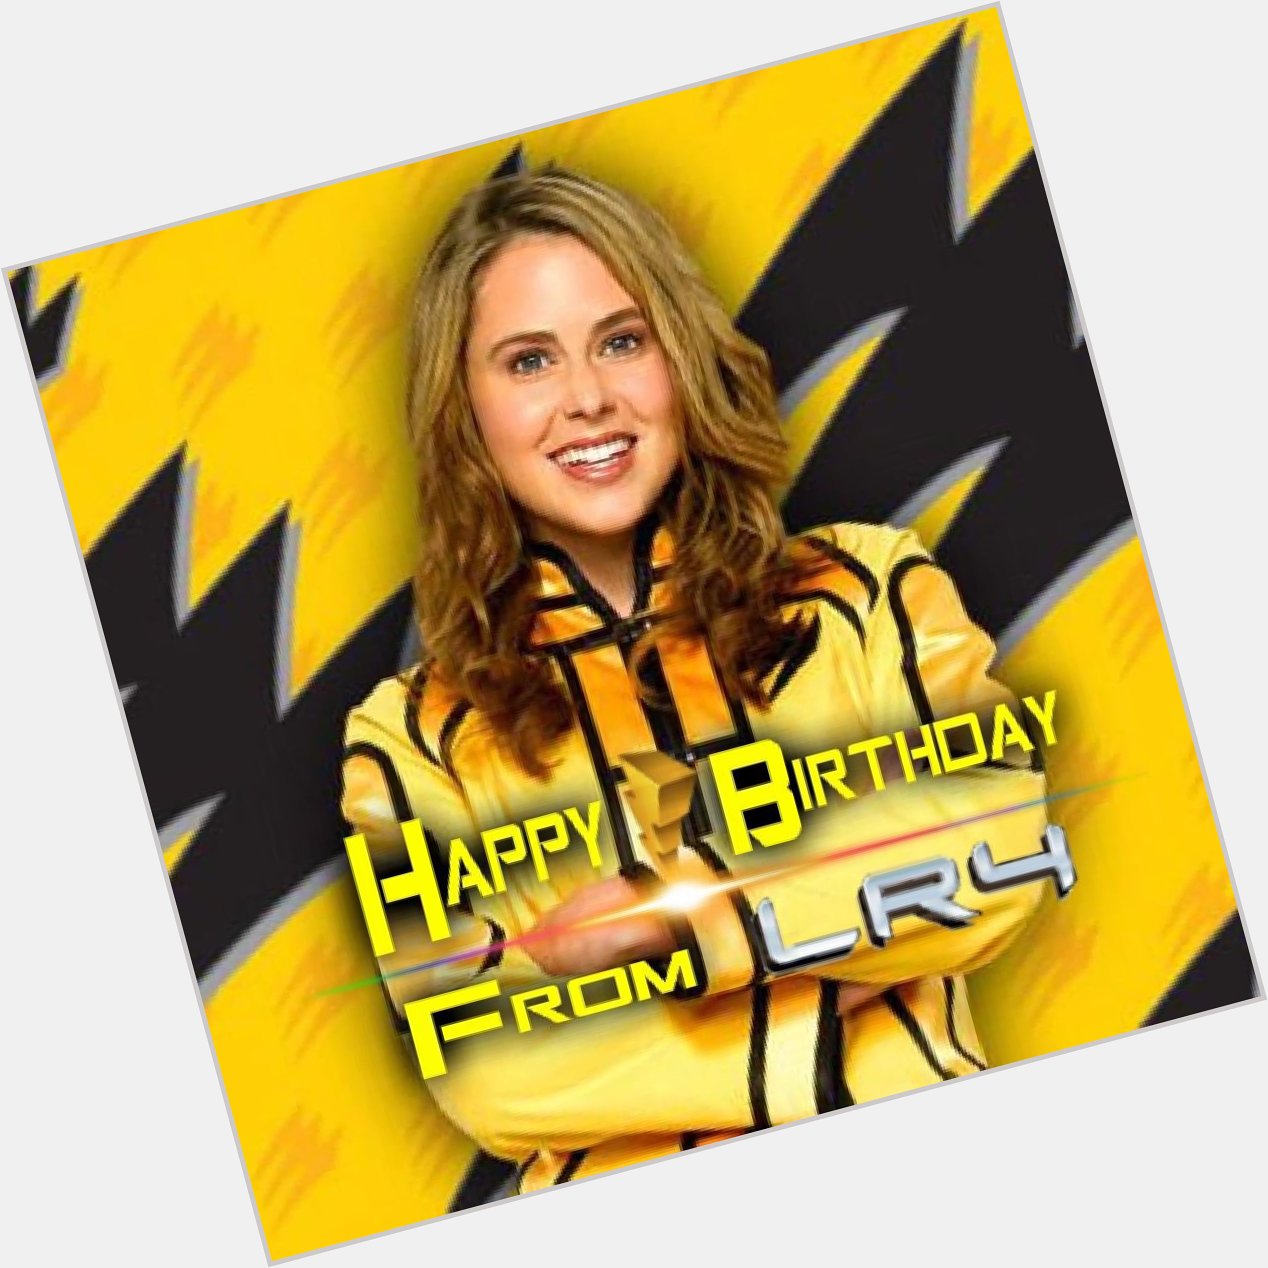 LR4 would like to wish Anna Hutchison a Happy Birthday! 